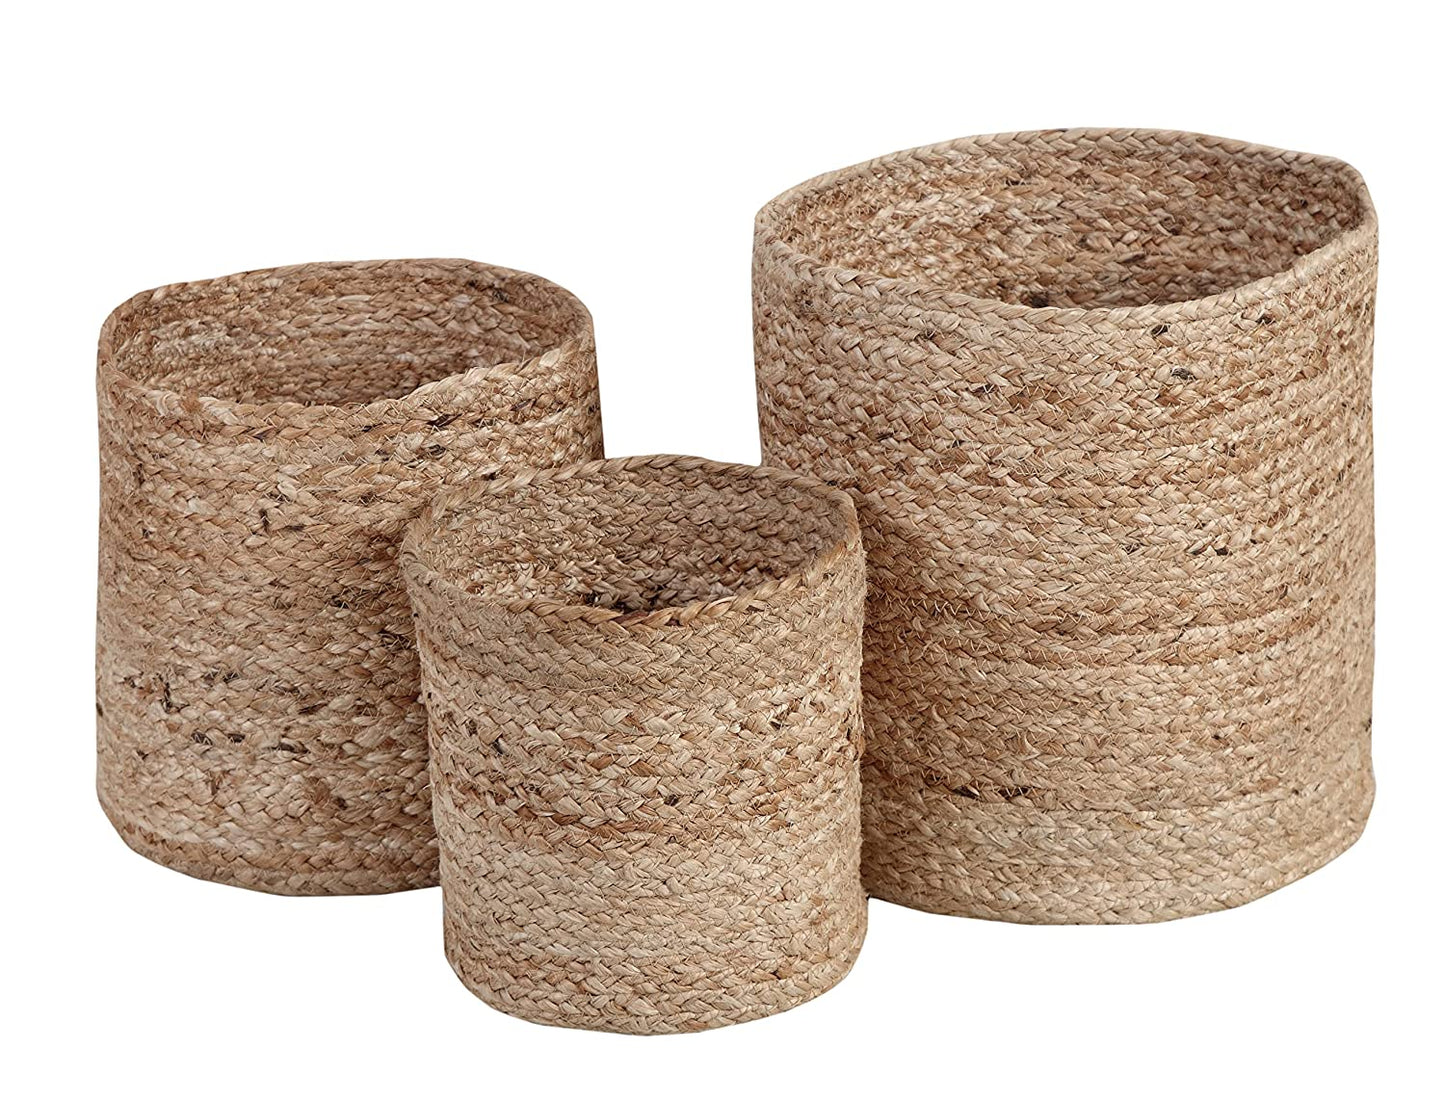 TIB The Intellect Bazaar Jute Planter Pots/Handcrafted Storage Basket with Handle, Multi-Purpose use for Living Room Pack of 3(8x8, 10x10, 12x12 Inches) Beige Color